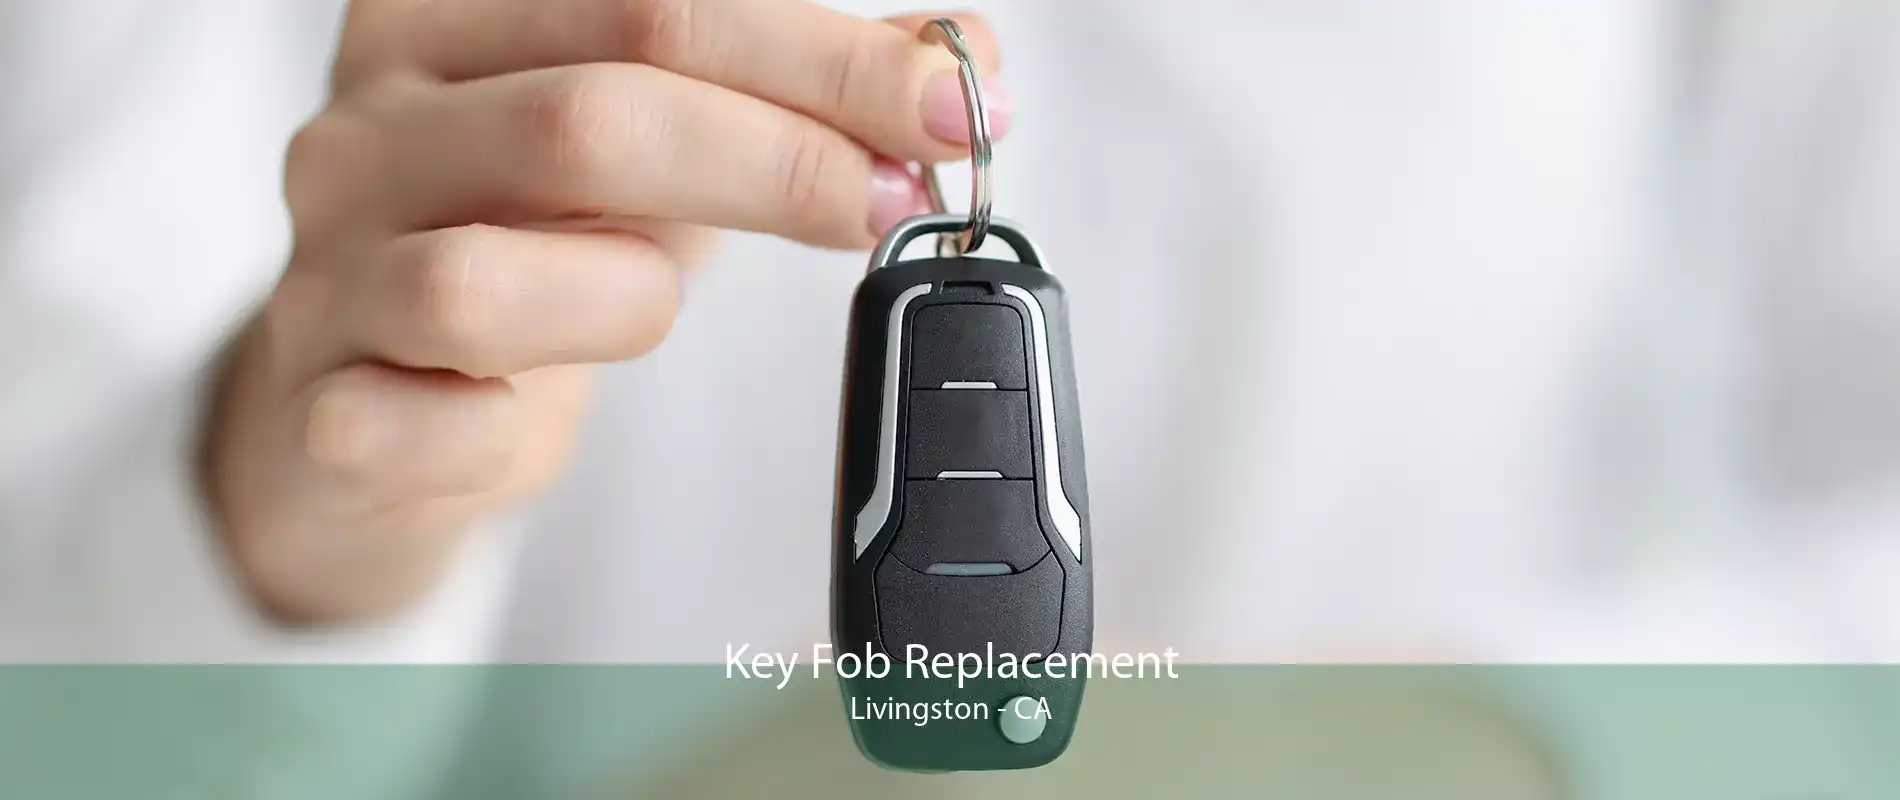 Key Fob Replacement Livingston - CA